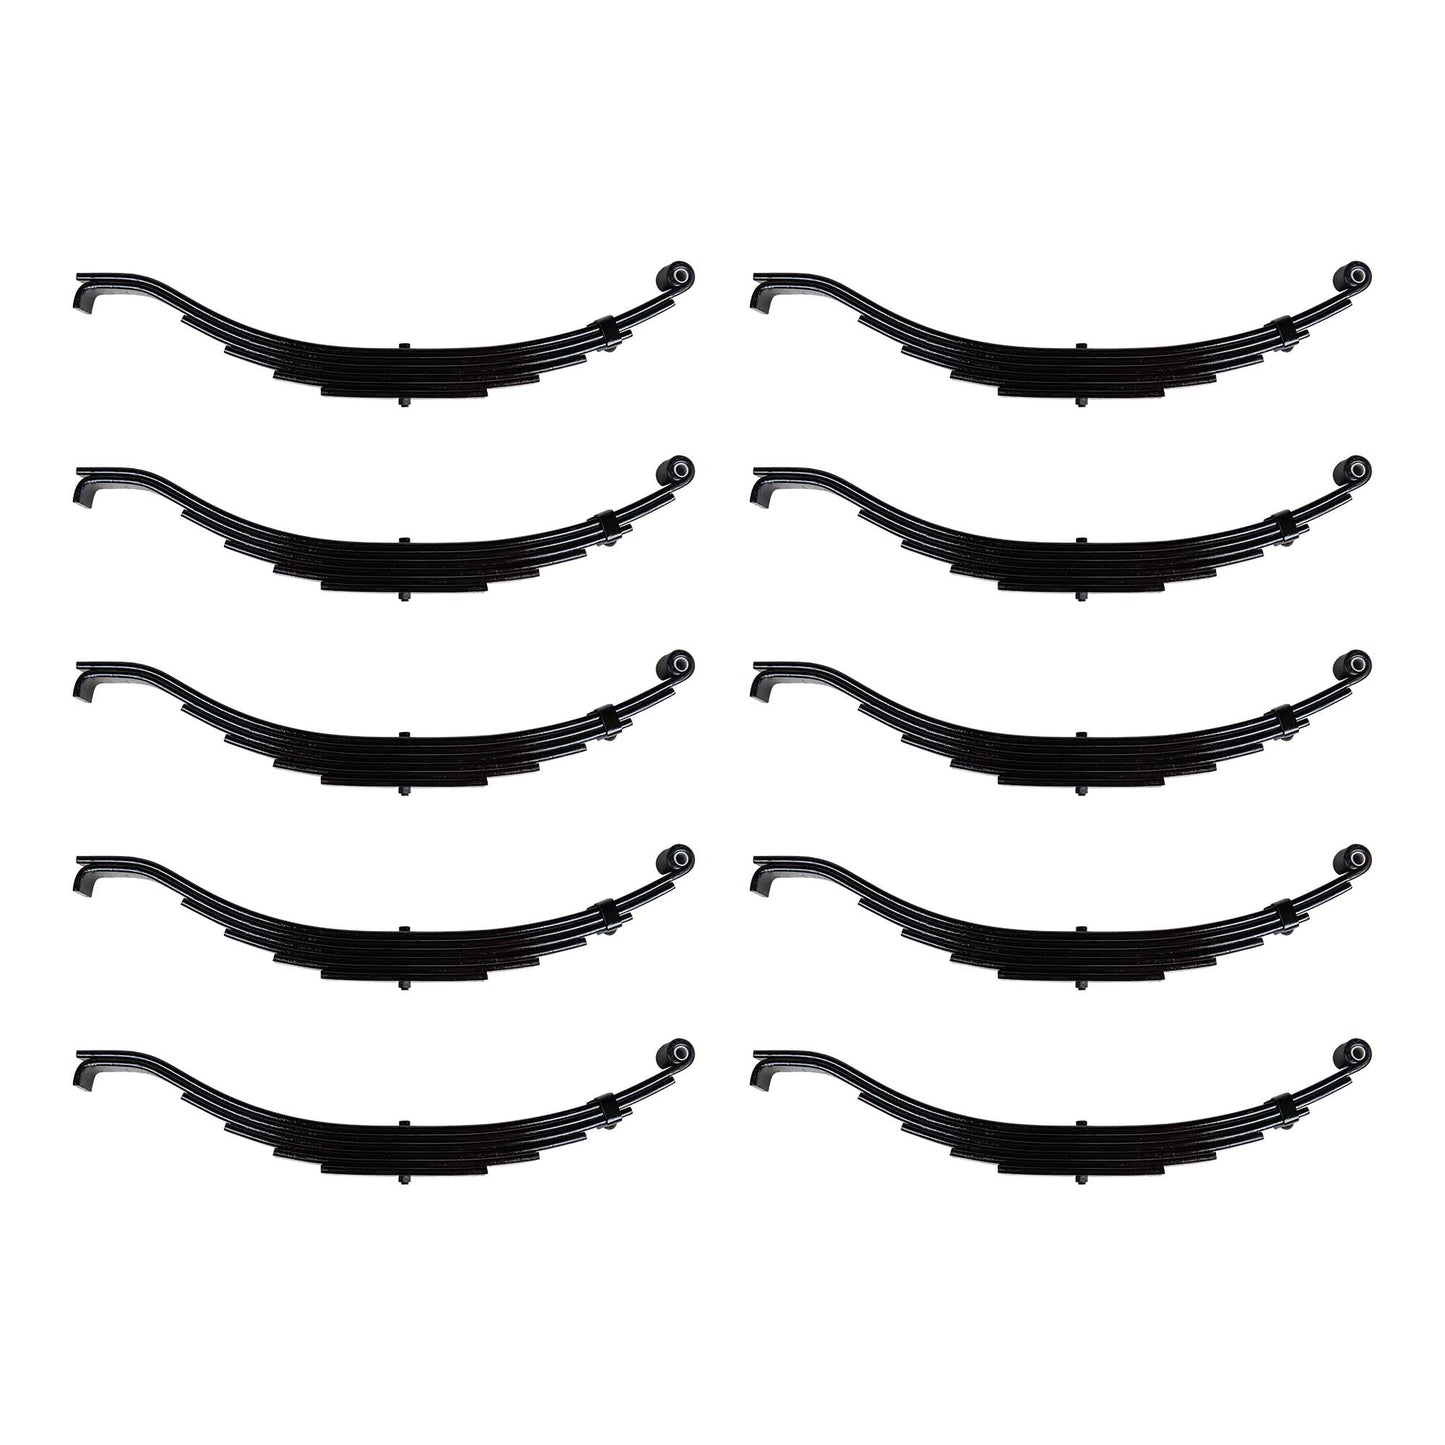 6 Leaf 29 1/2" x 2" Wide Trailer Heavy Duty Slipper Spring for 8000 lb Axles - The Trailer Parts Outlet